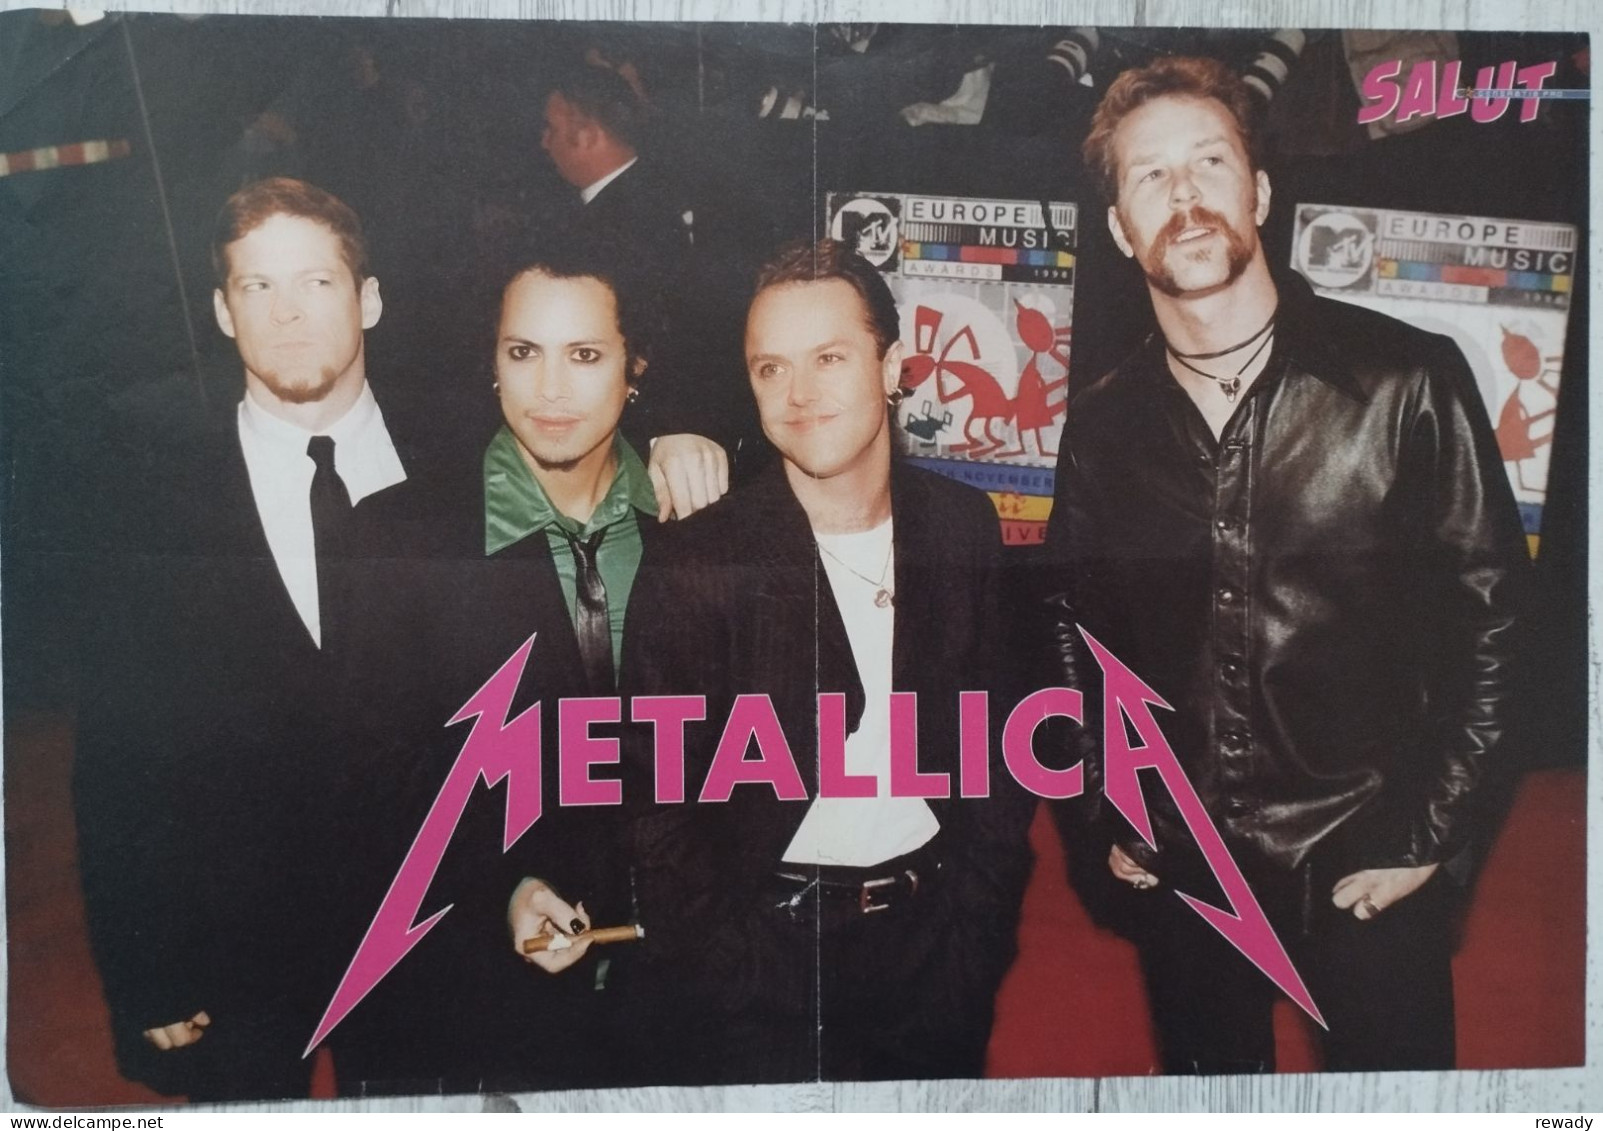 Tarkan - Metallica - Poster - Affiche (270x430 Mm) - Afiches & Pósters